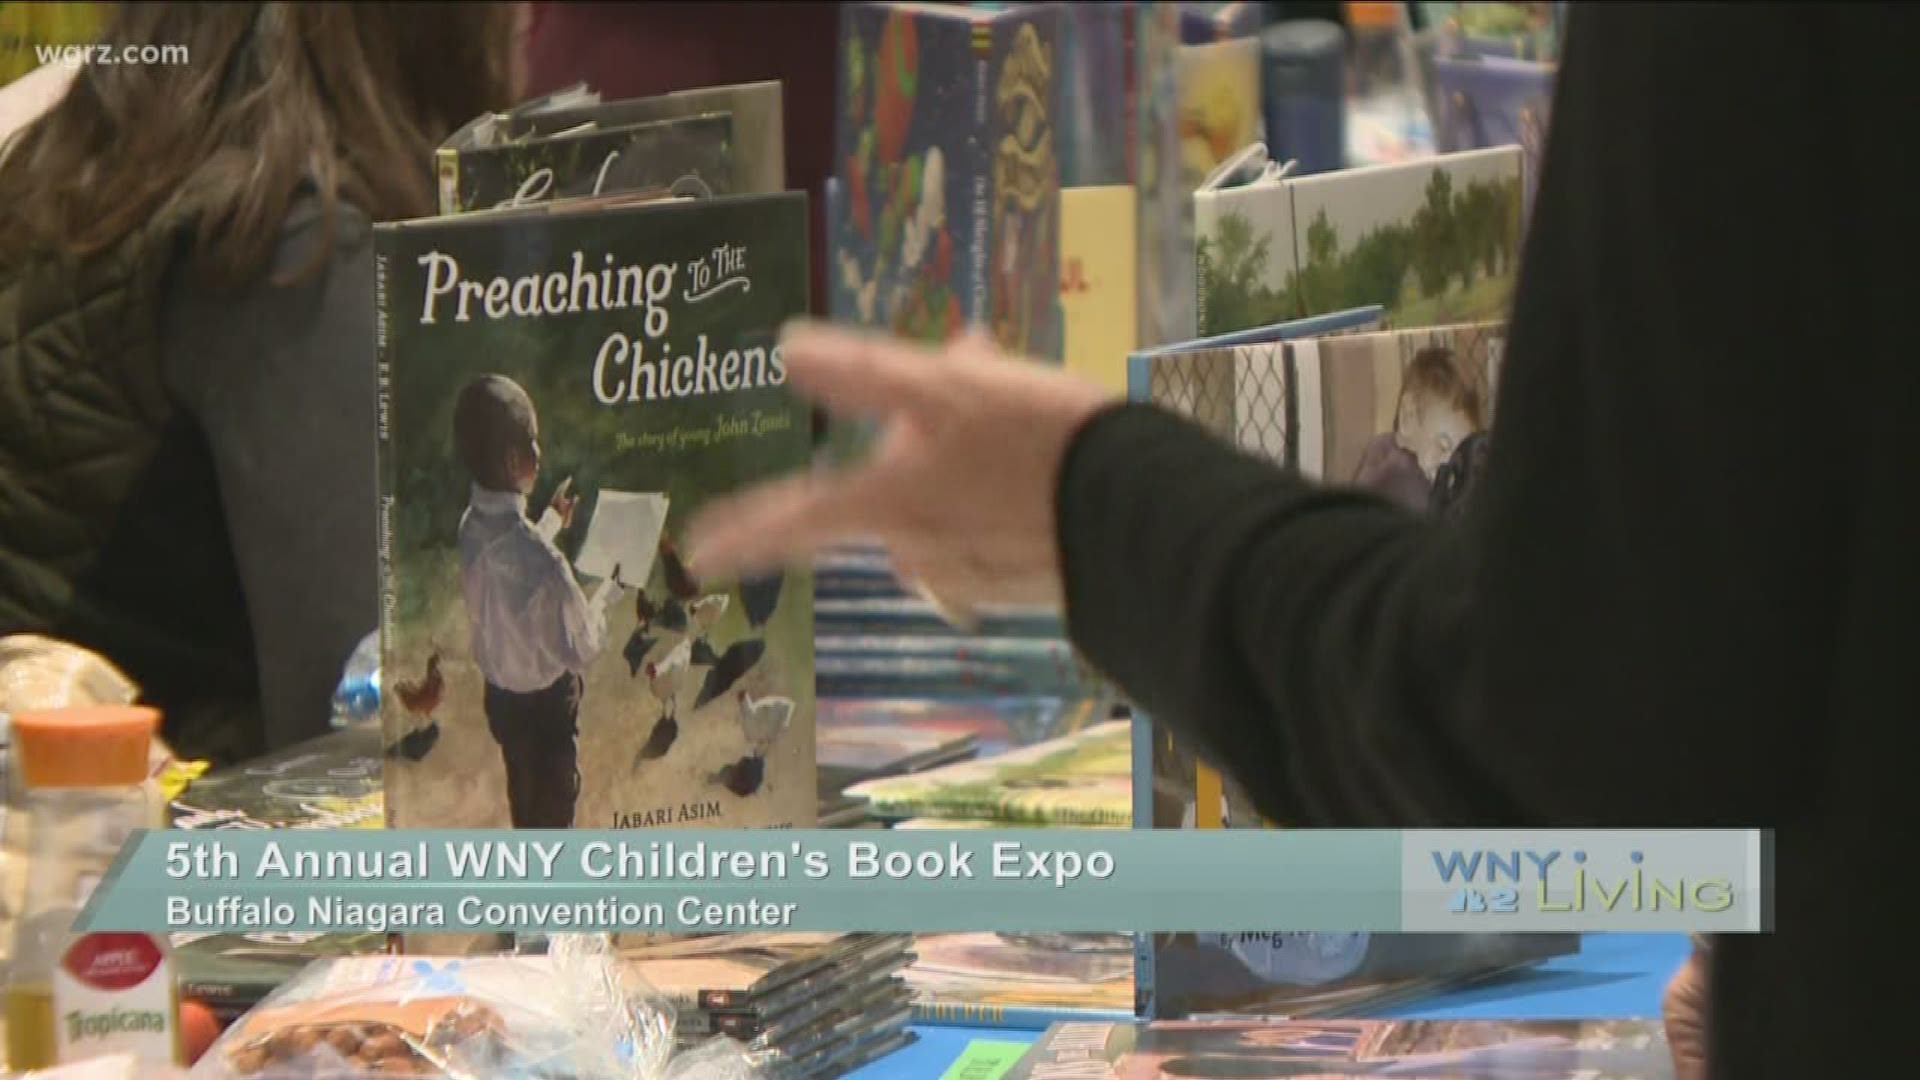 October 26 - Children’s Book Expo (THIS VIDEO IS SPONSORED BY CHILDREN'S BOOK EXPO)